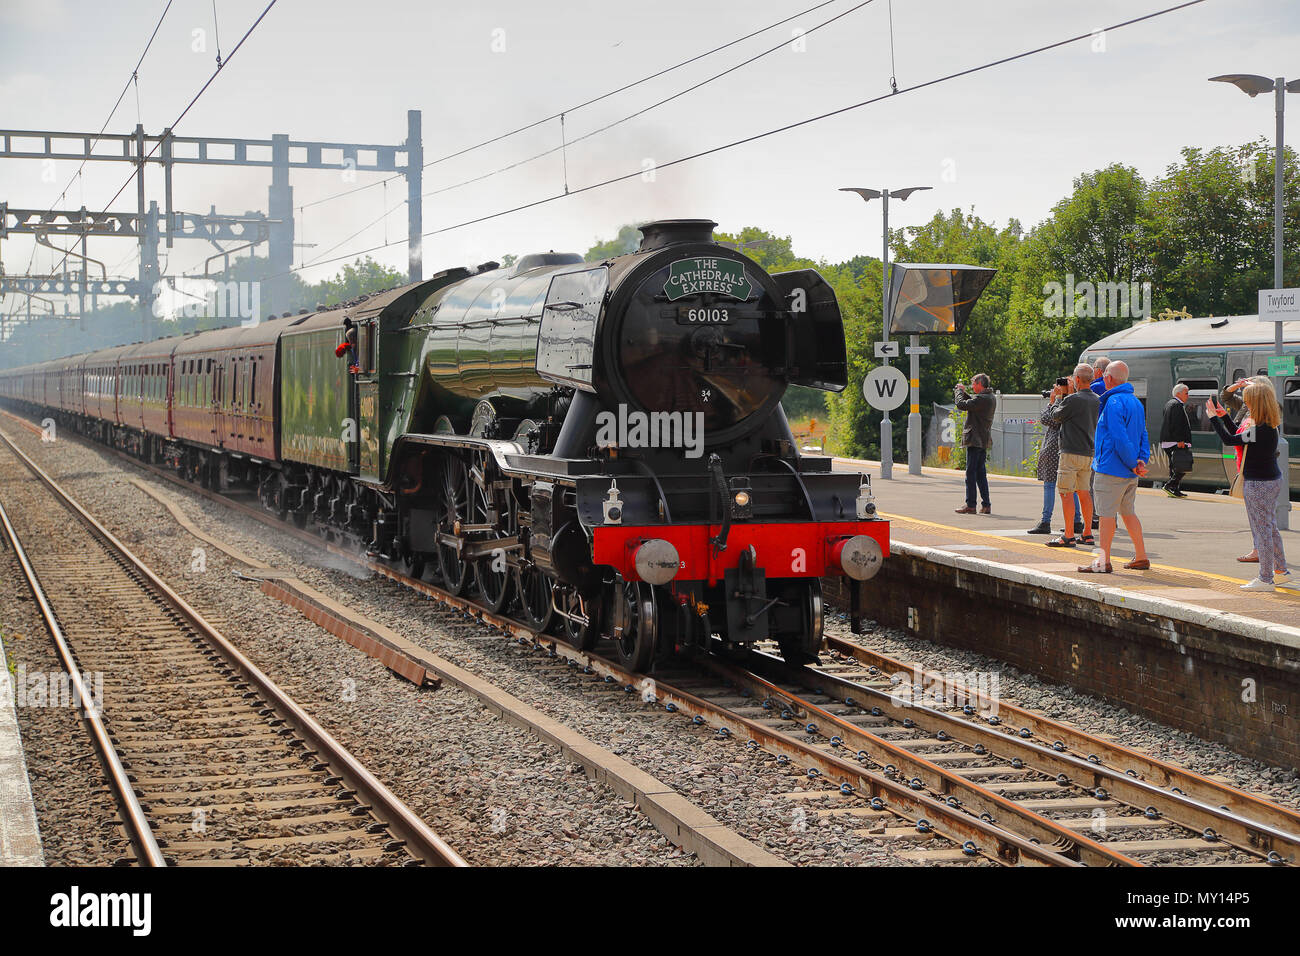 Twyford station, Berkshire, UK. 5th June, 2018. Hundreds of people waited patiently for the Flying Scotsman train on its way from Reading to Paddington. Families and trainspotters alike had gathered to get a glimpse of the iconic train on its way to London. Credit: Uwe Deffner/Alamy Live News Stock Photo